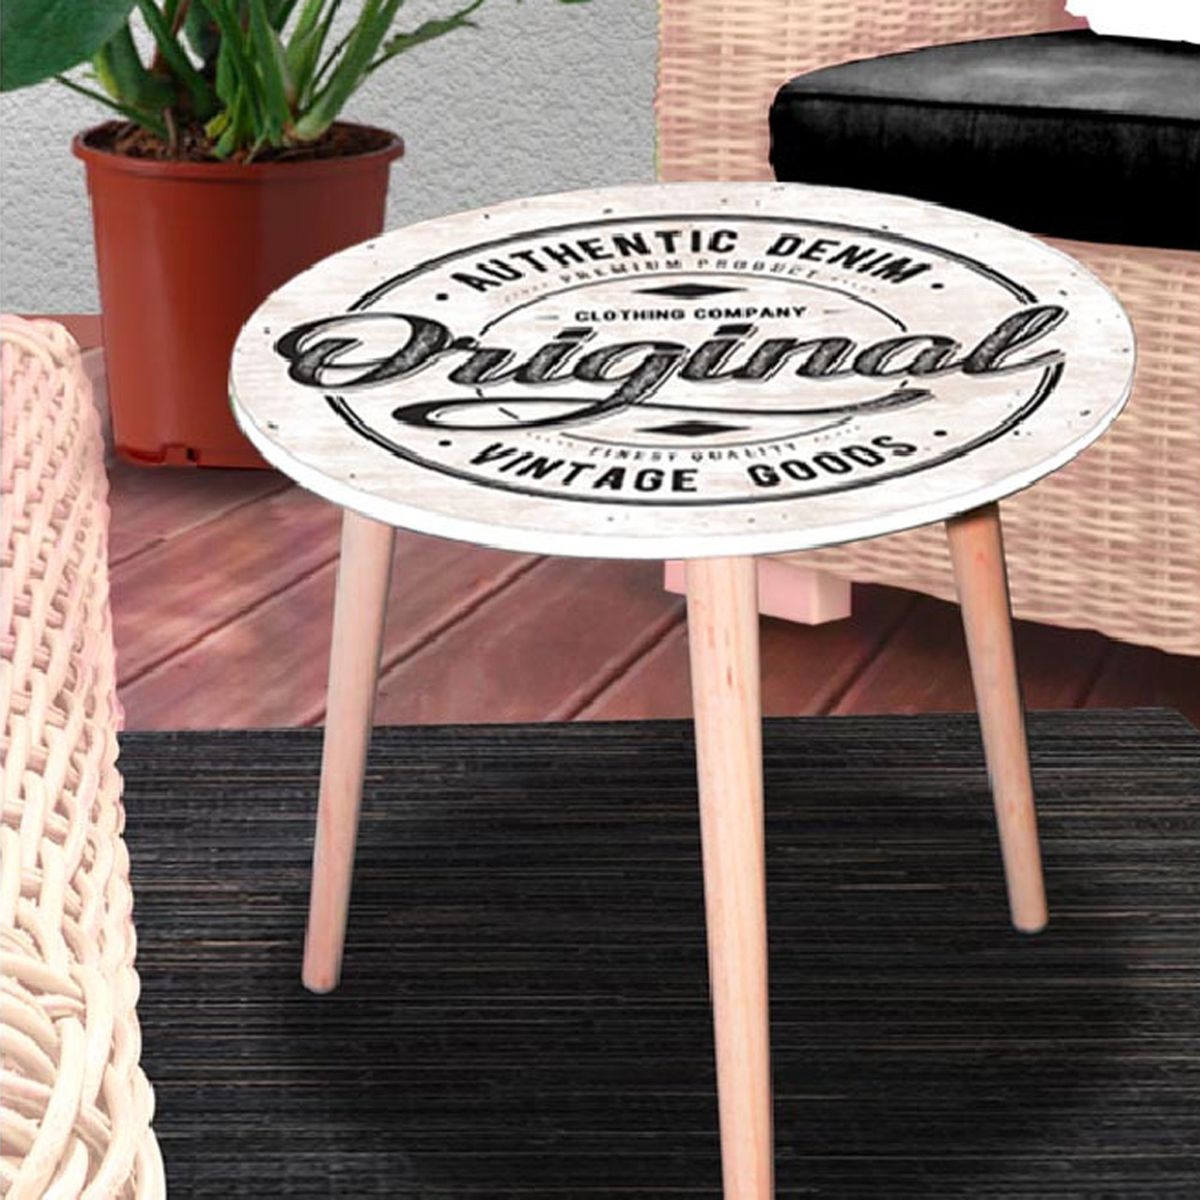 Authentic Denim round side table